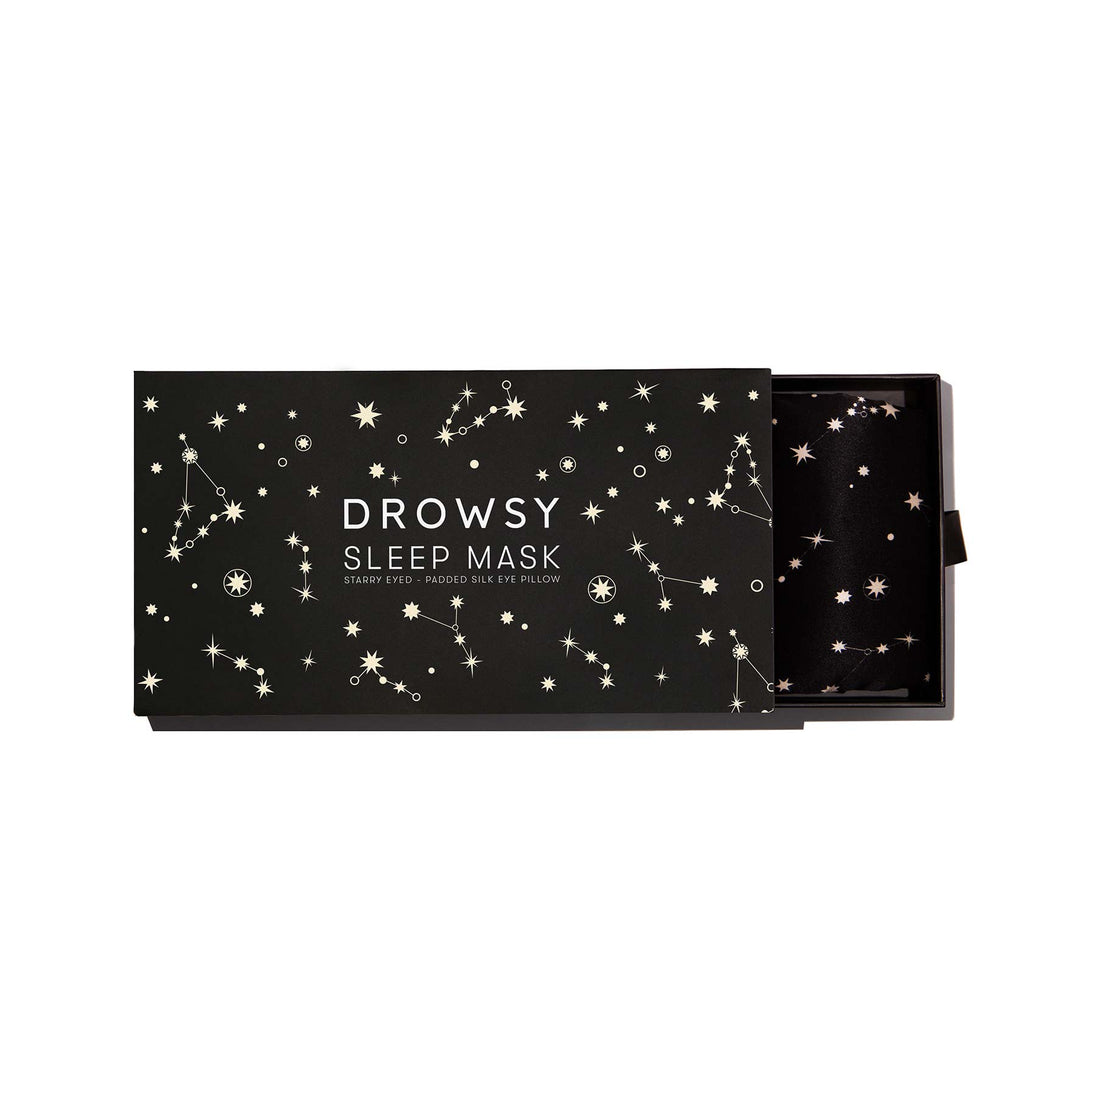 Drowsy Sleep Co. Starry Eyed sleep mask in box on a white background